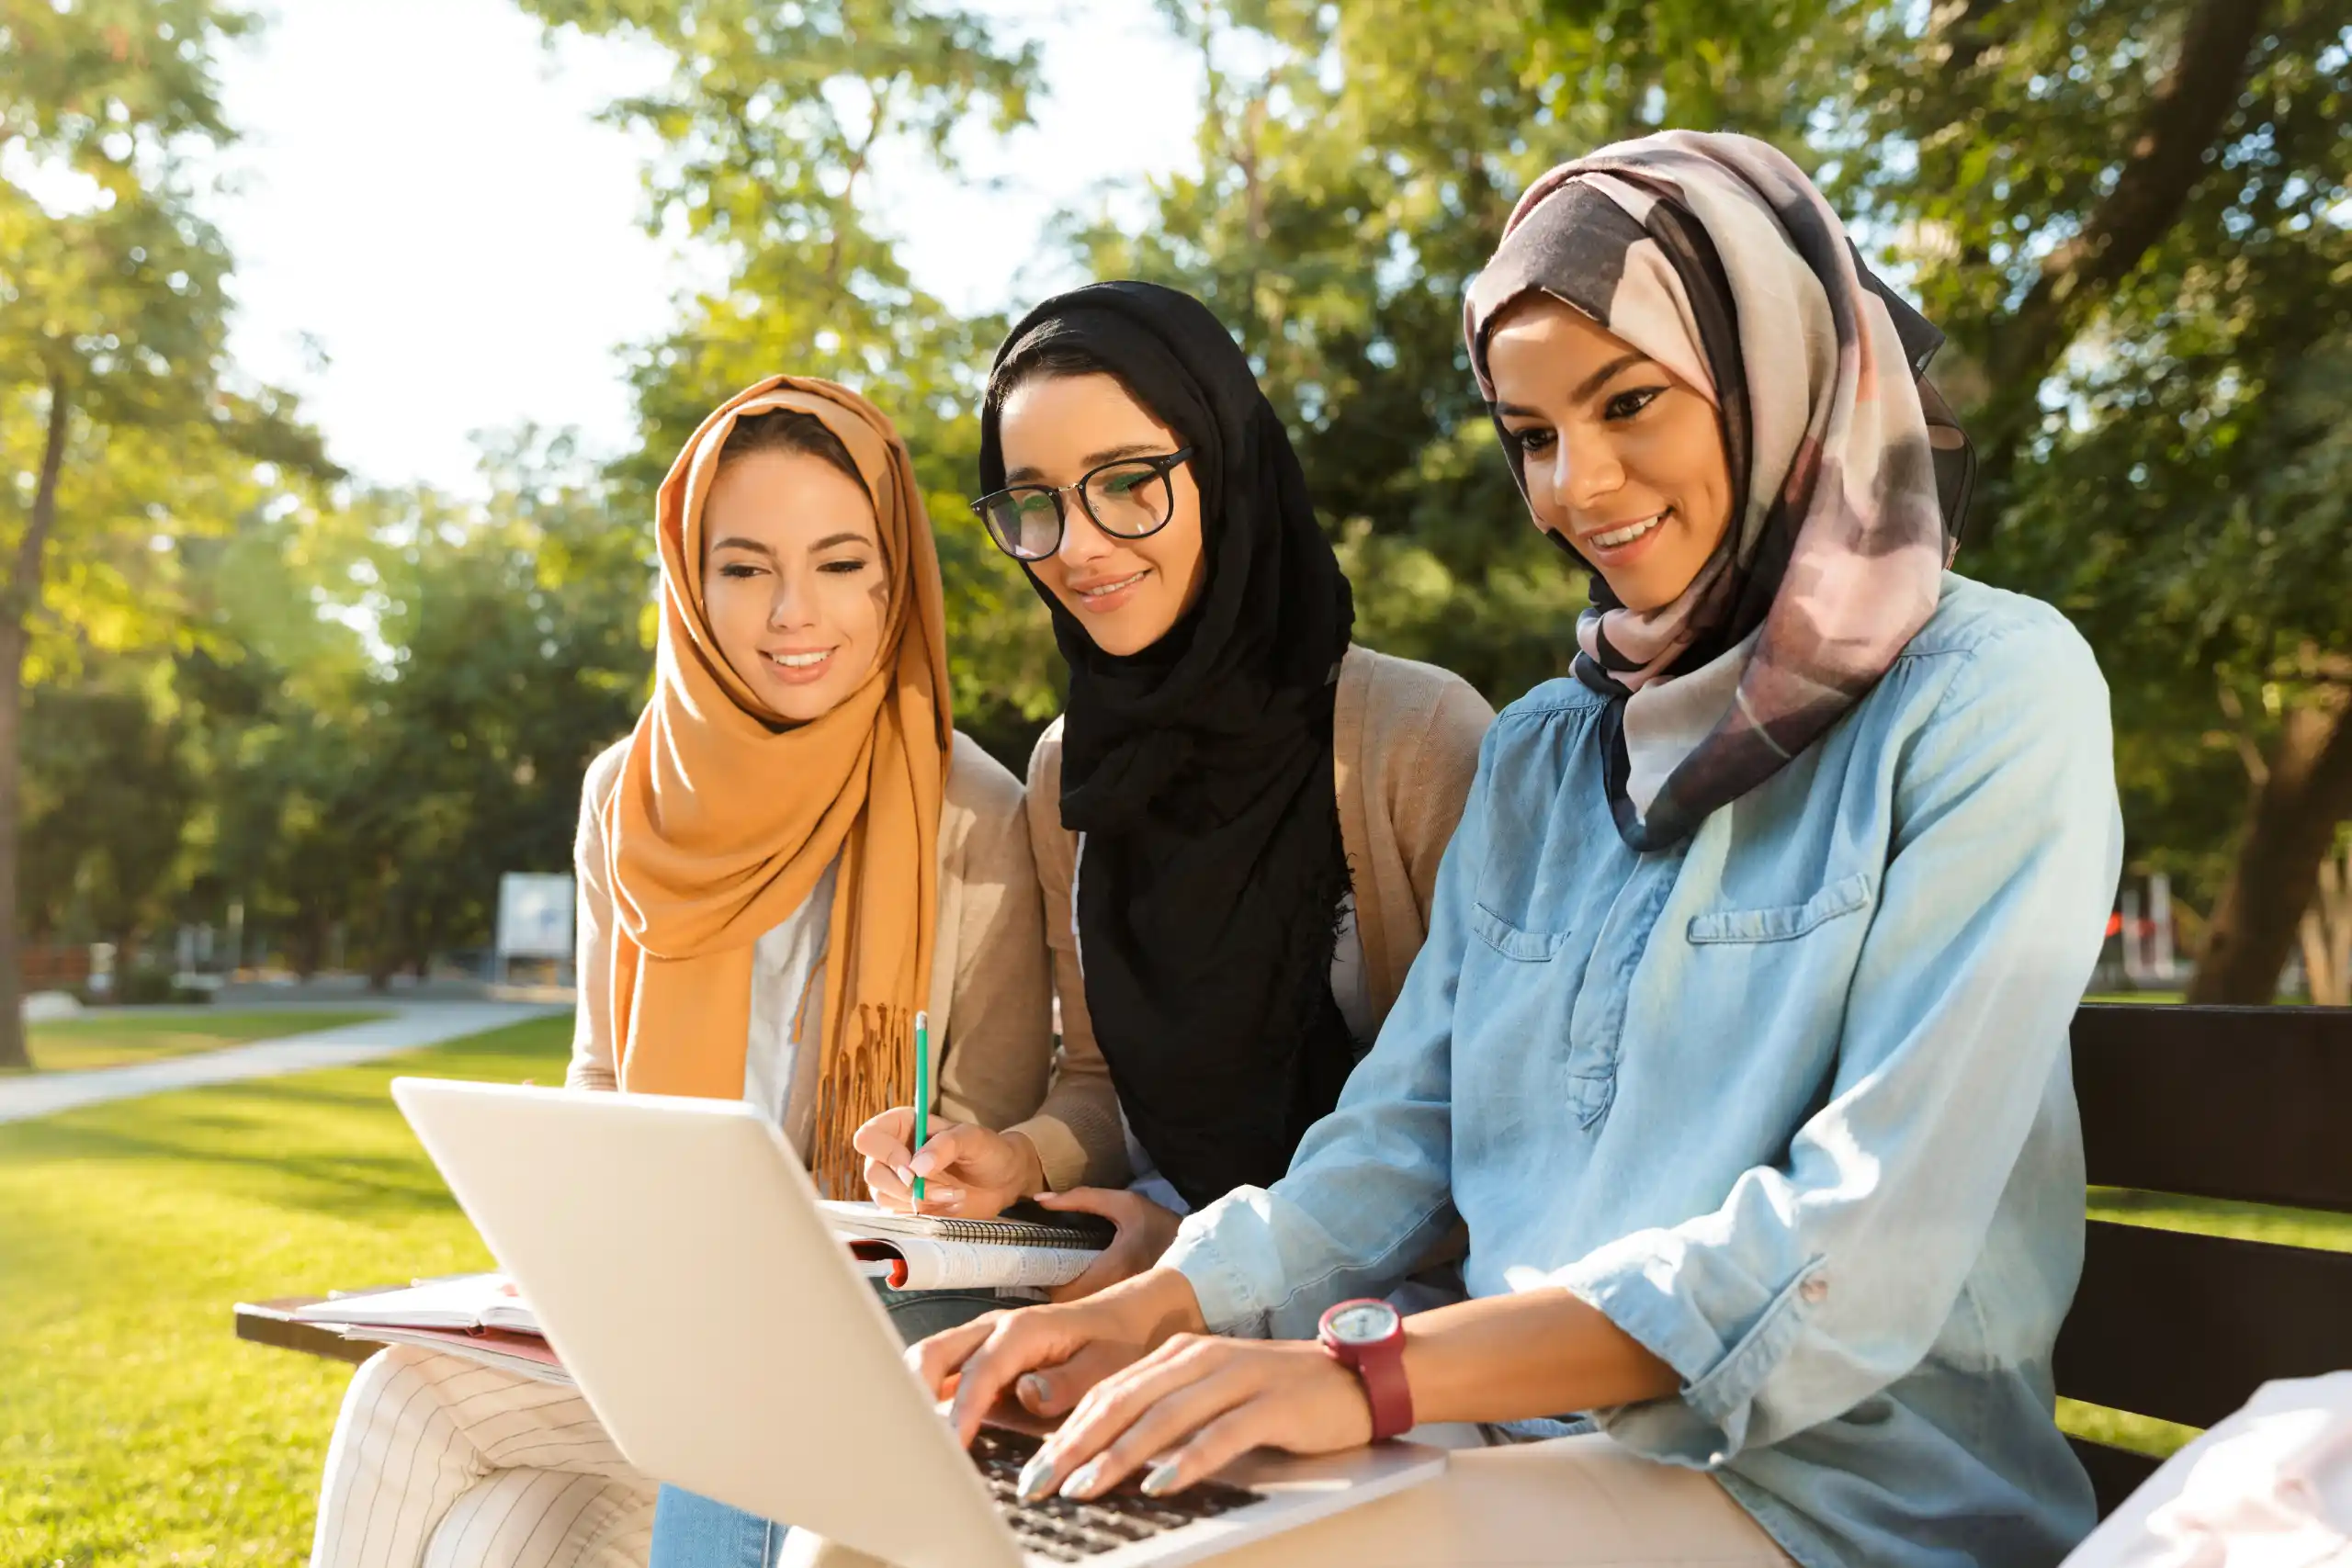 A Guide for Kuwaiti Students Pursuing Studies Abroad